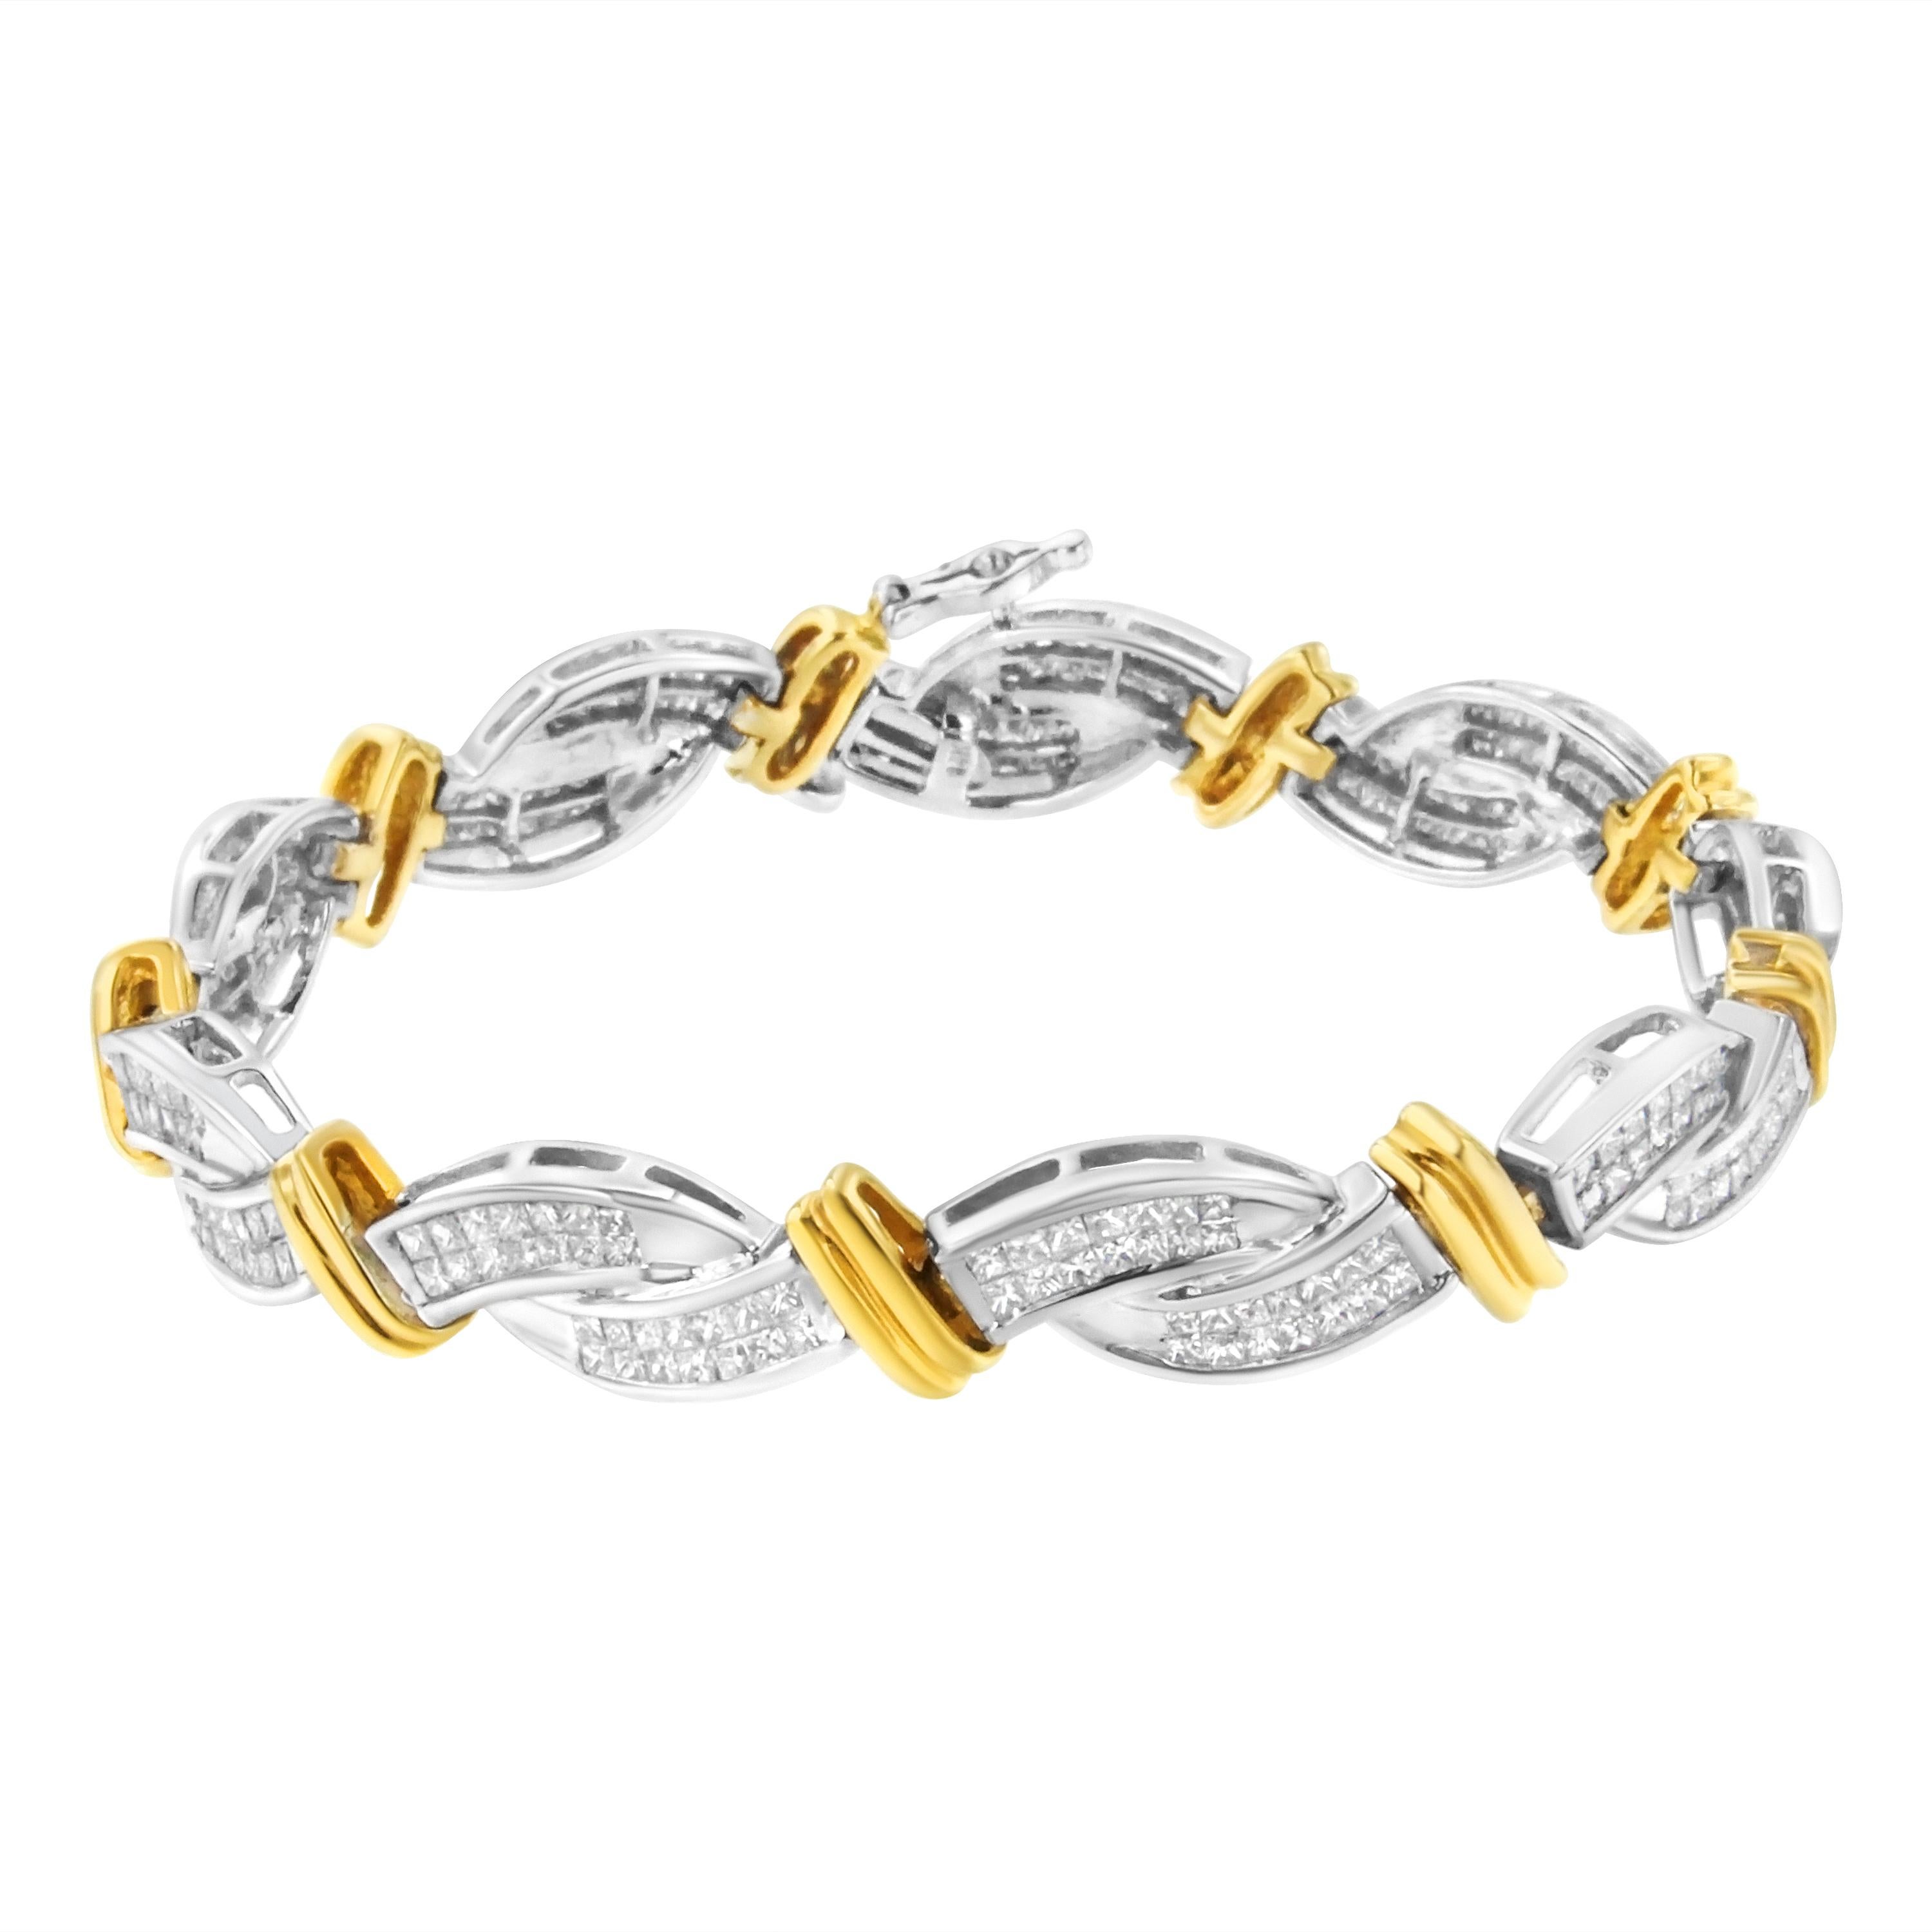 A lovely complement to any style, this 14 karats two-toned gold bracelet comes with box clasp lock with which the bracelet will rest beautifully on your wrist. Representing a twisted design with gold ribbon accents, it is ornate with glittering